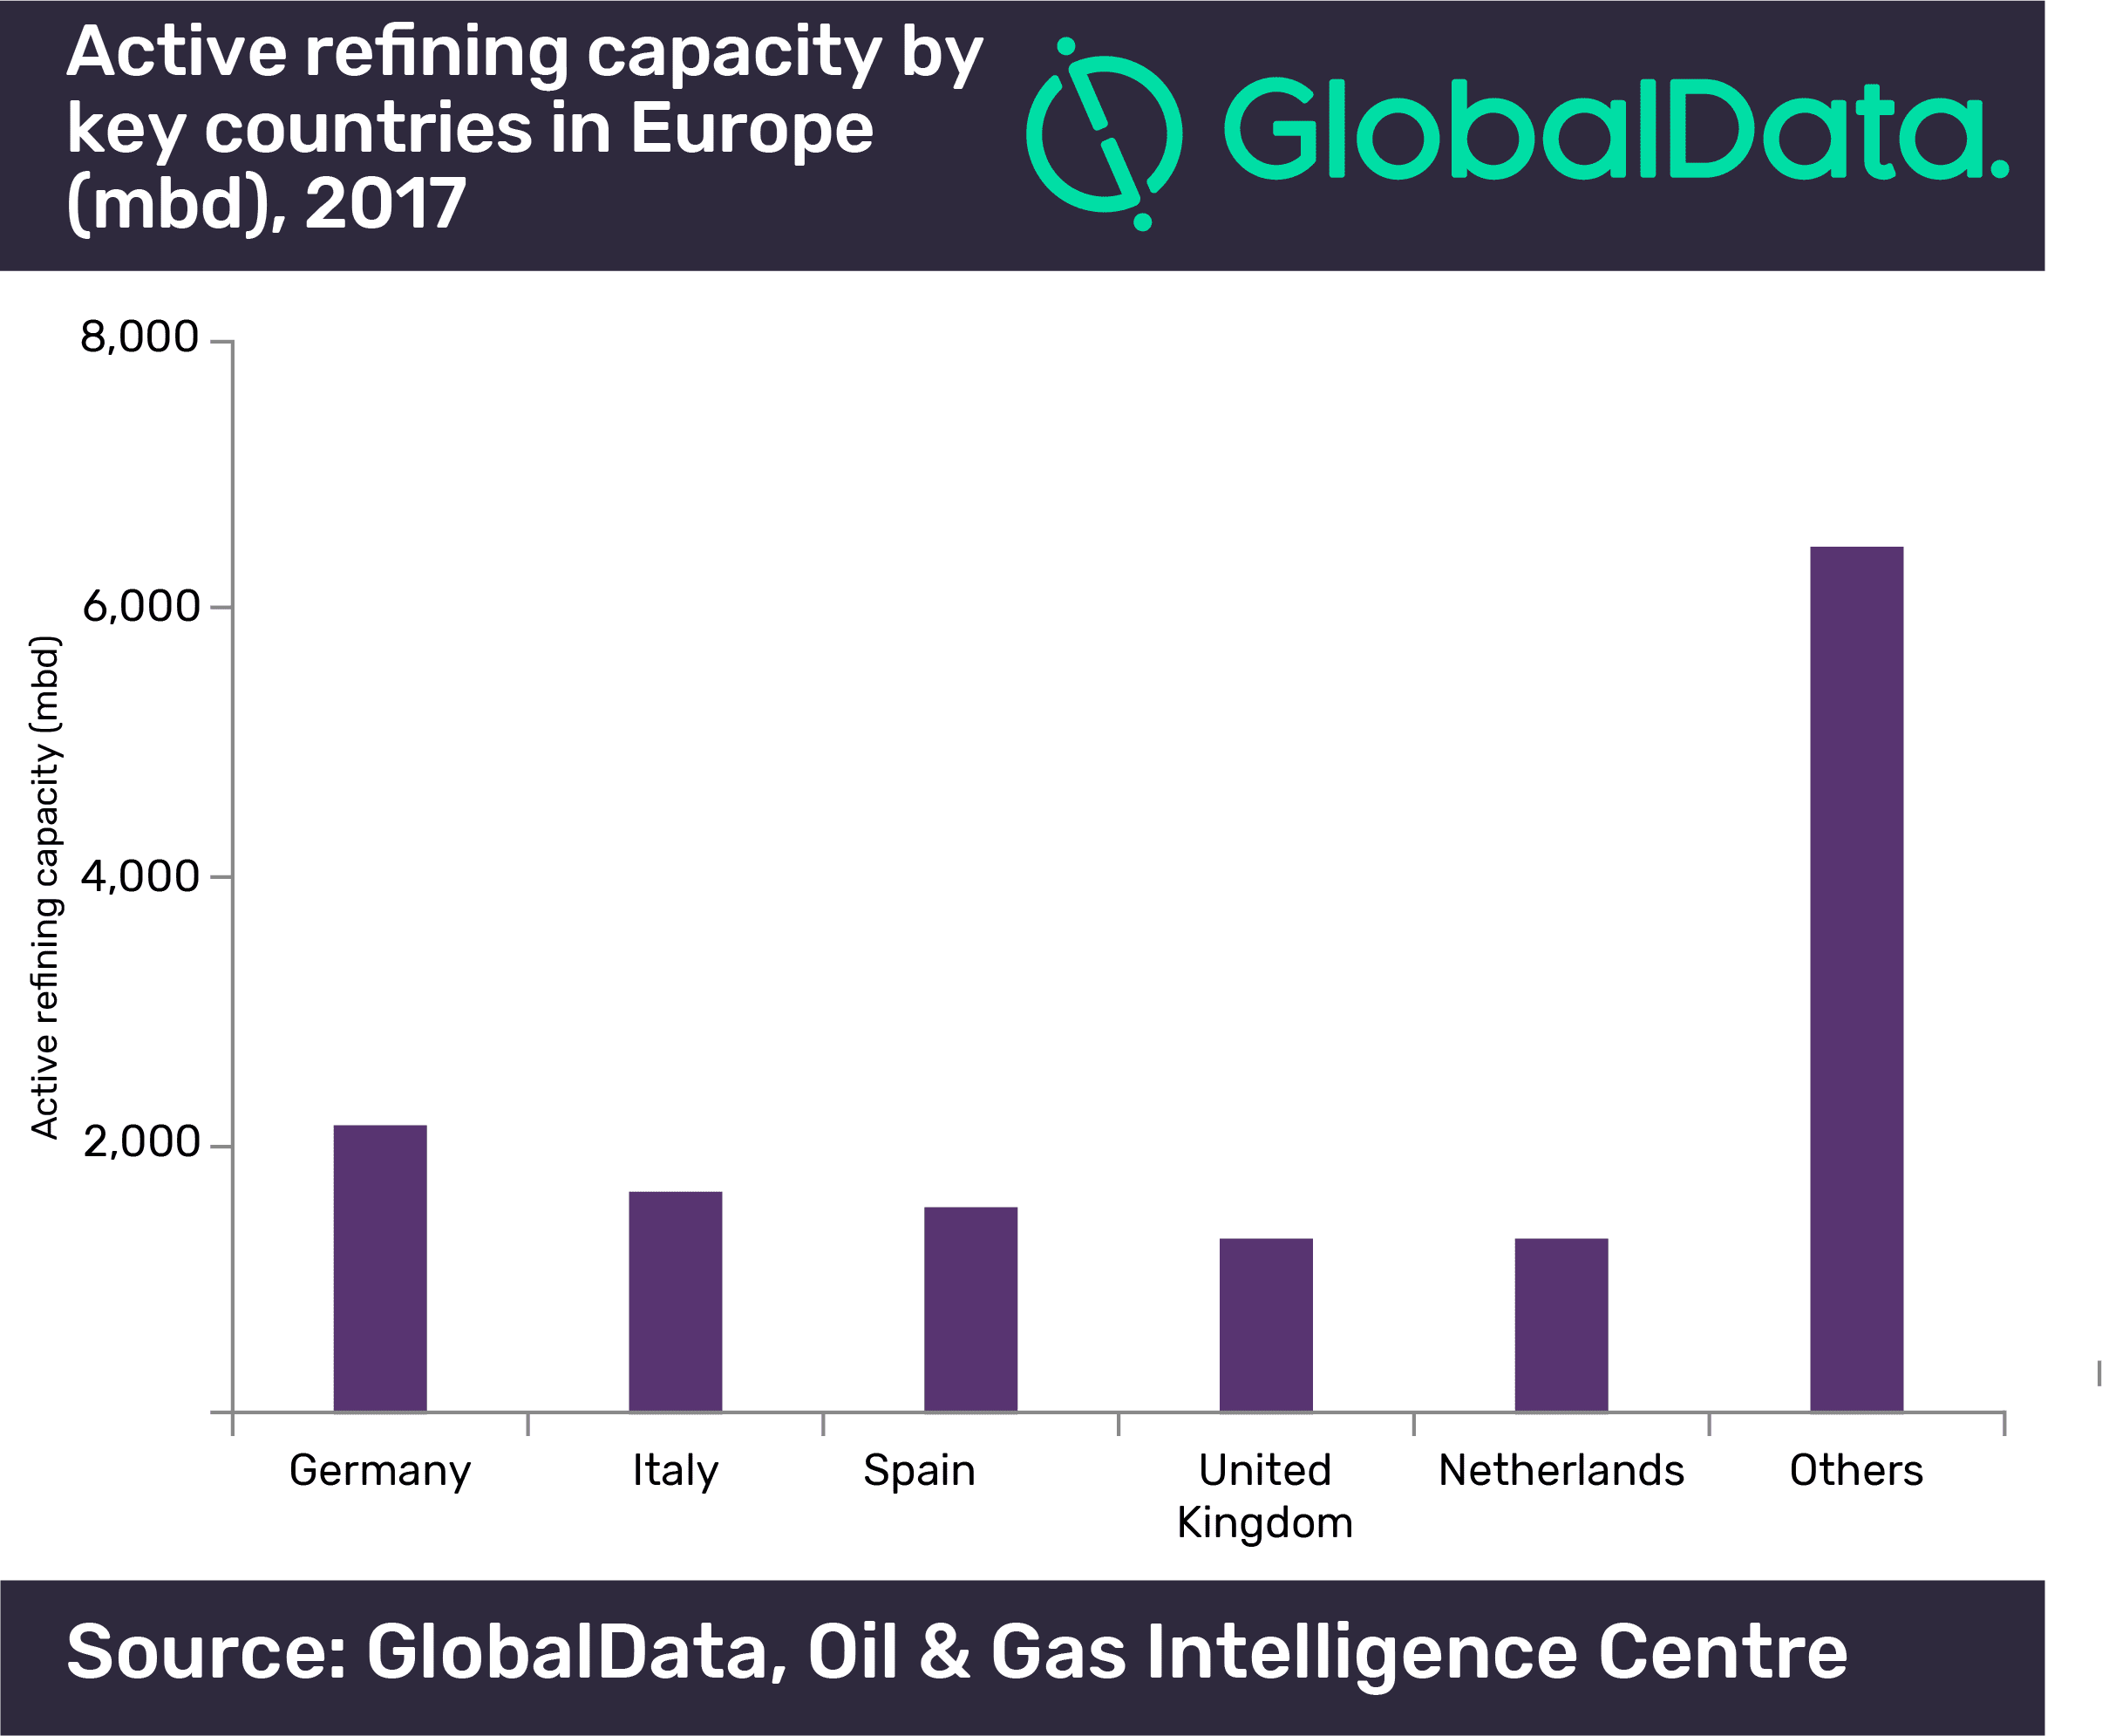 Germany, Italy and Spain together contribute more than 35% to refining capacity in Europe, says GlobalData